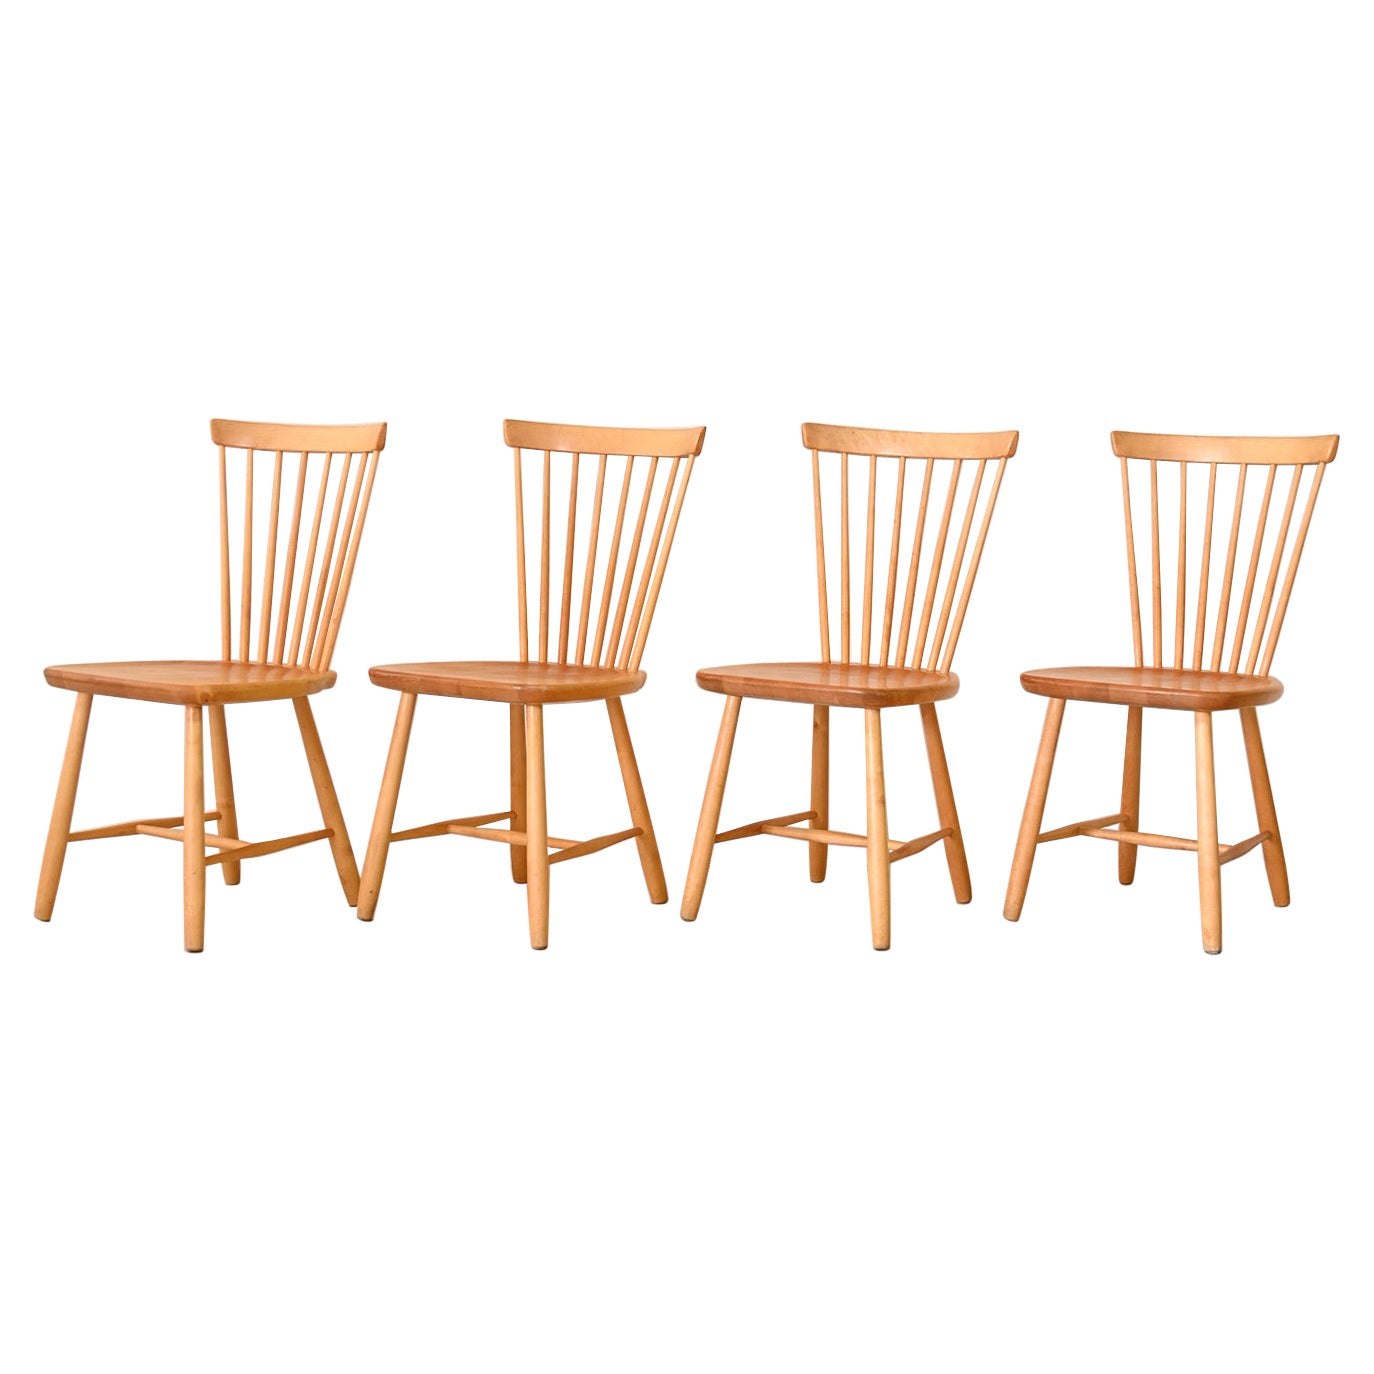 Set of 4 chairs by Carl Malmsten "Lilac Aland" For Sale